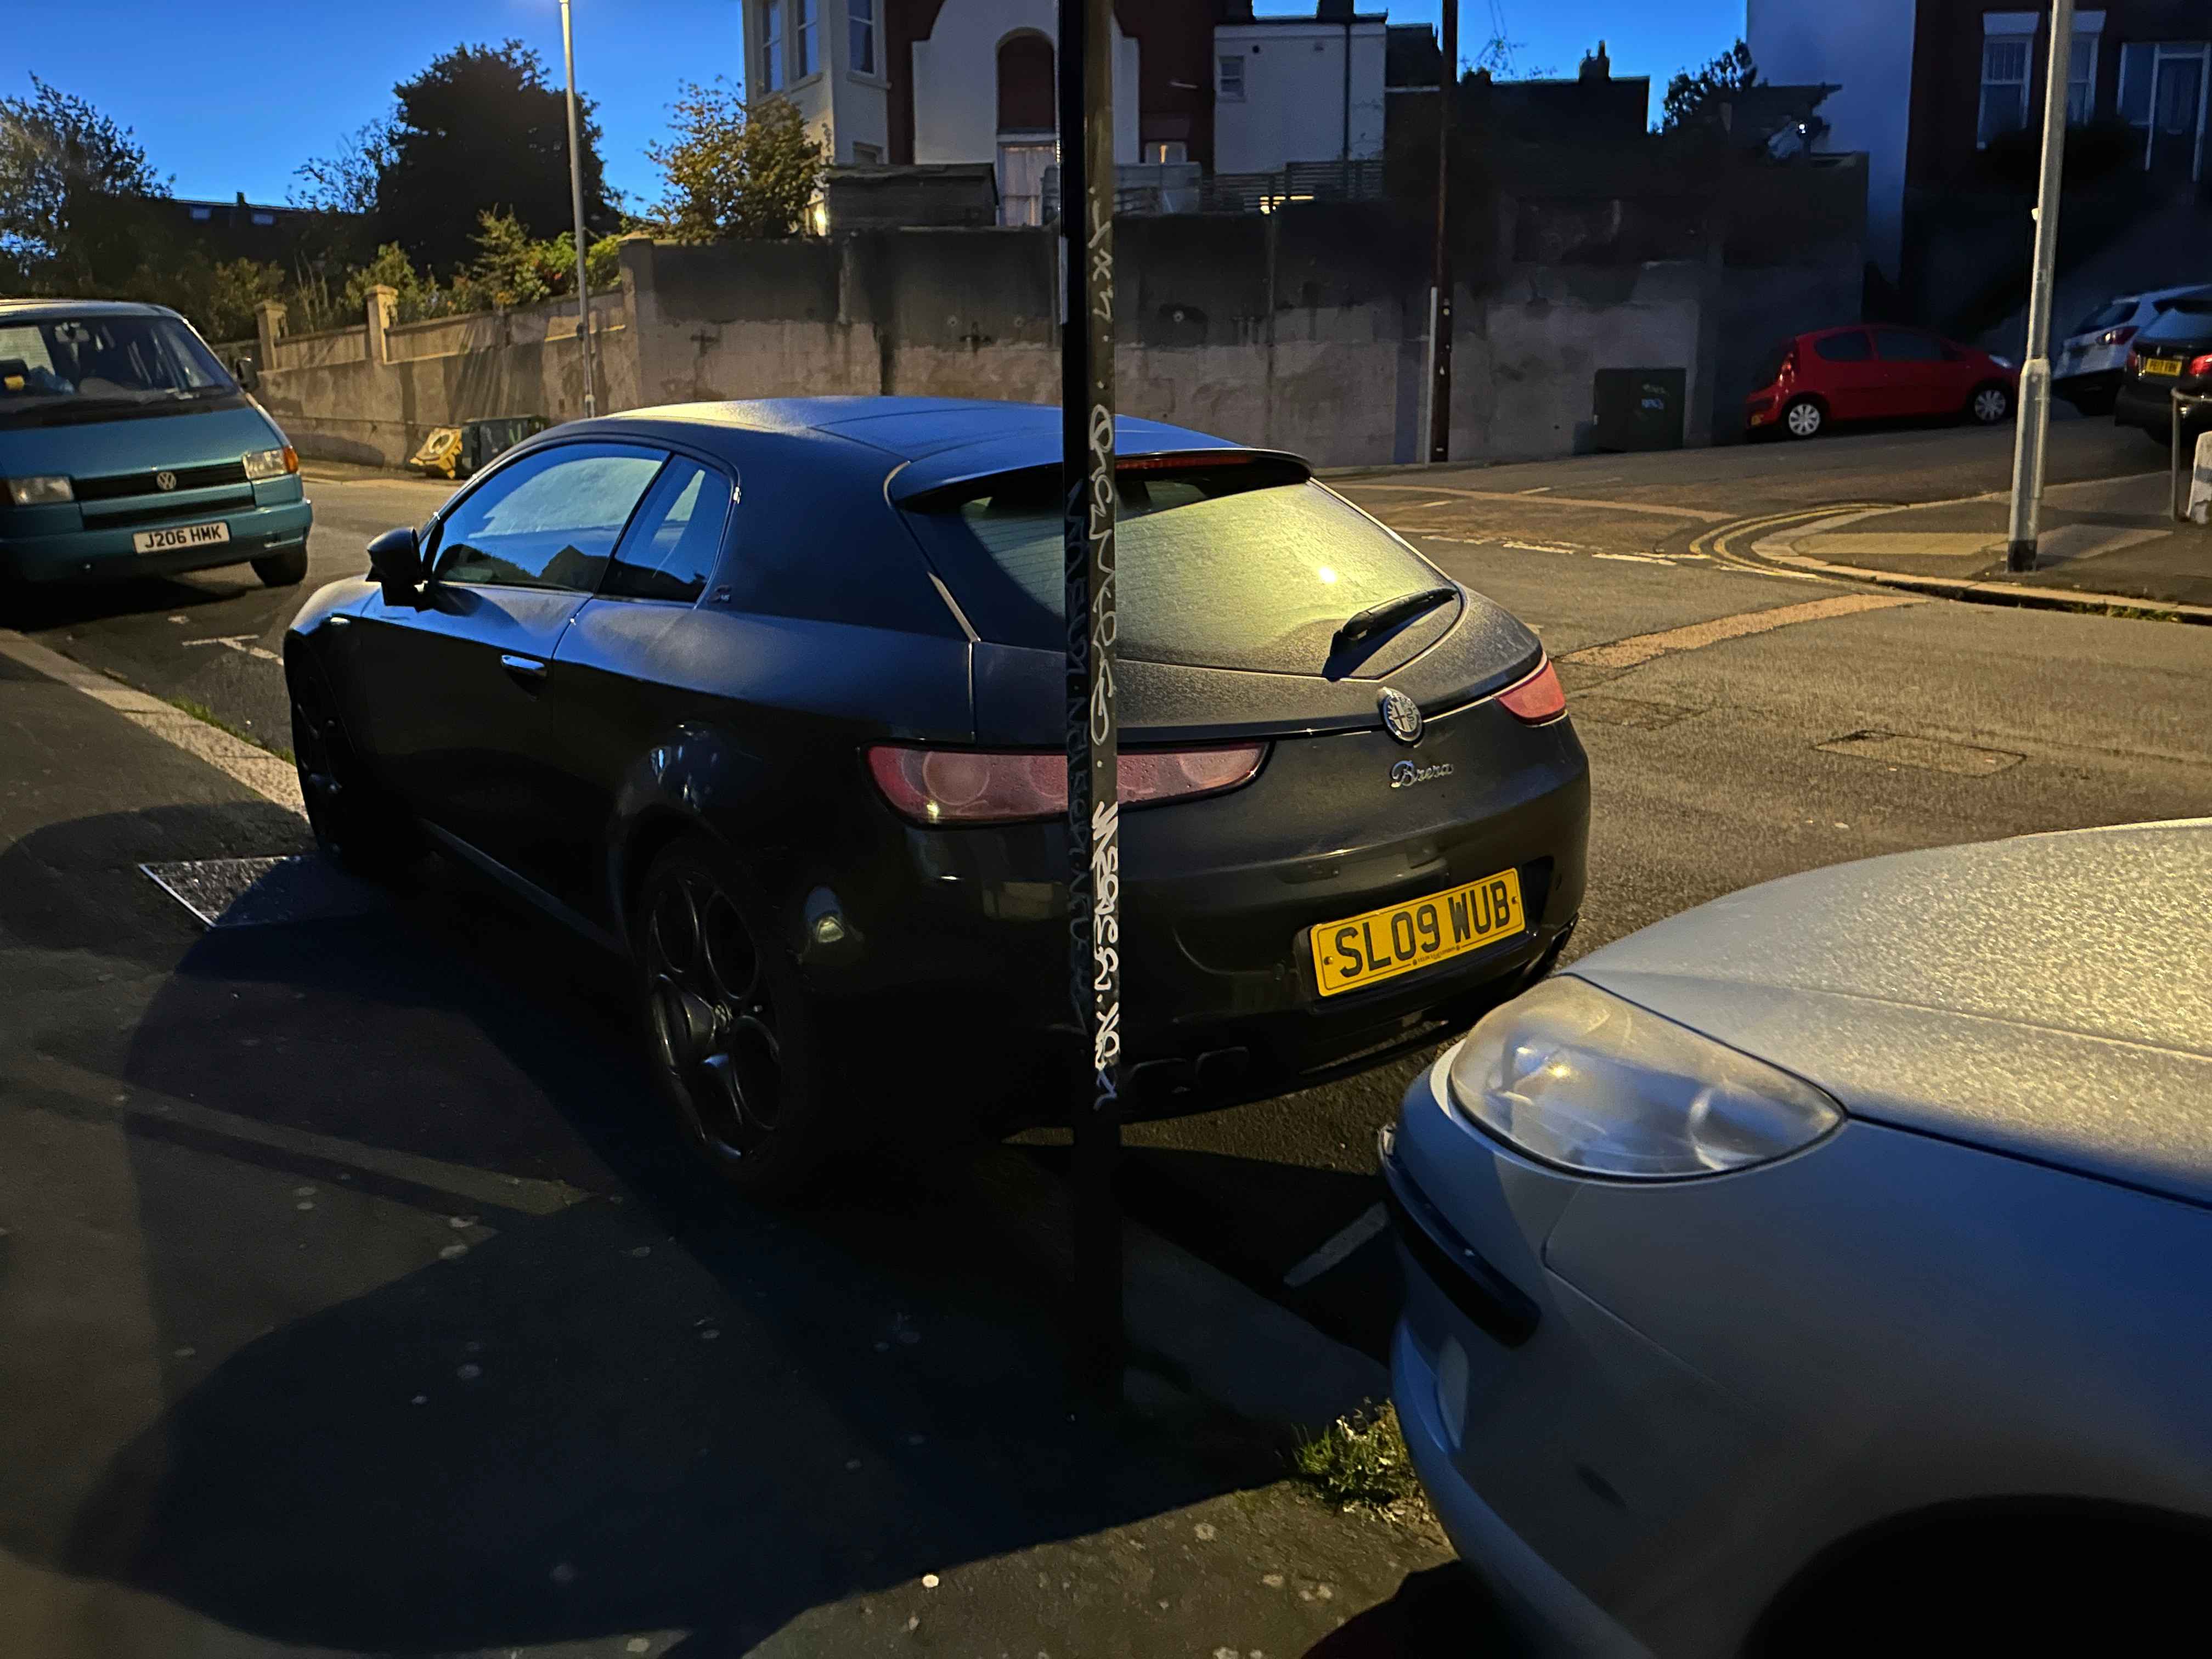 Photograph of SL09 WUB - a Black Alfa Romeo Brera parked in Hollingdean by a non-resident. The second of twenty photographs supplied by the residents of Hollingdean.